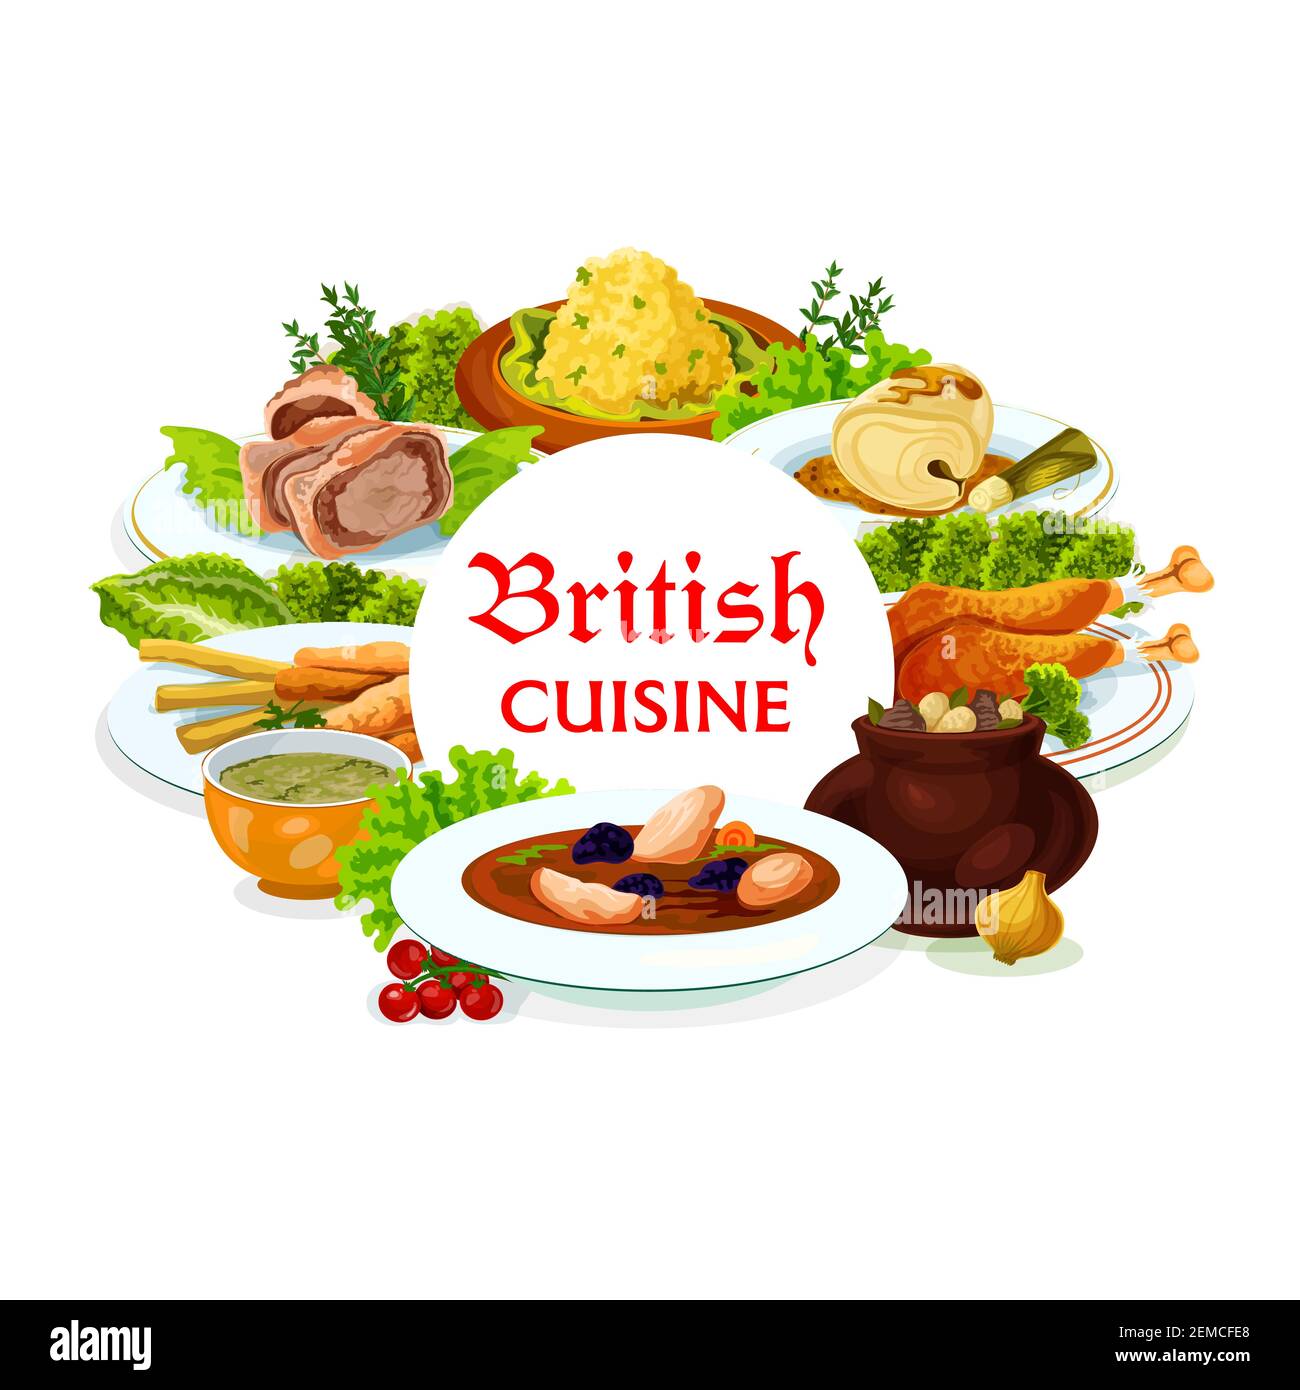 Britain cuisine vector meals kok-e-liki scotch soup, cod with sauce and smoked trout plate, beef wellington, broccoli and vegetable puree. Rabbit stew Stock Vector